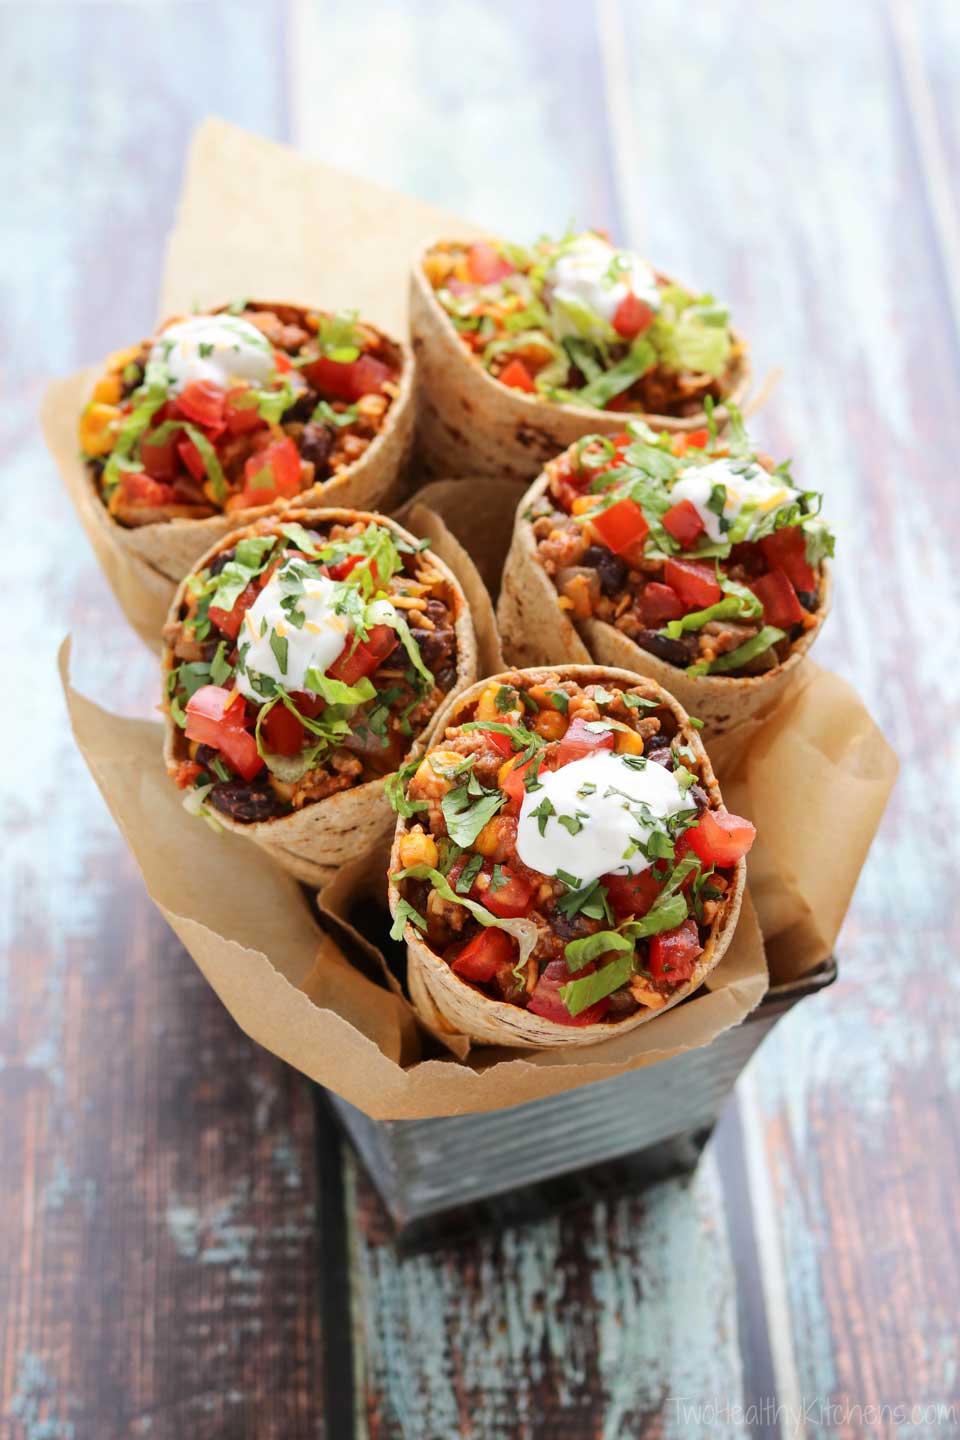 A fun twist on taco night, or a perfect DIY taco bar for parties and tailgating! Easy to see why these Ta-Cones are one of our most popular recipes of the year!